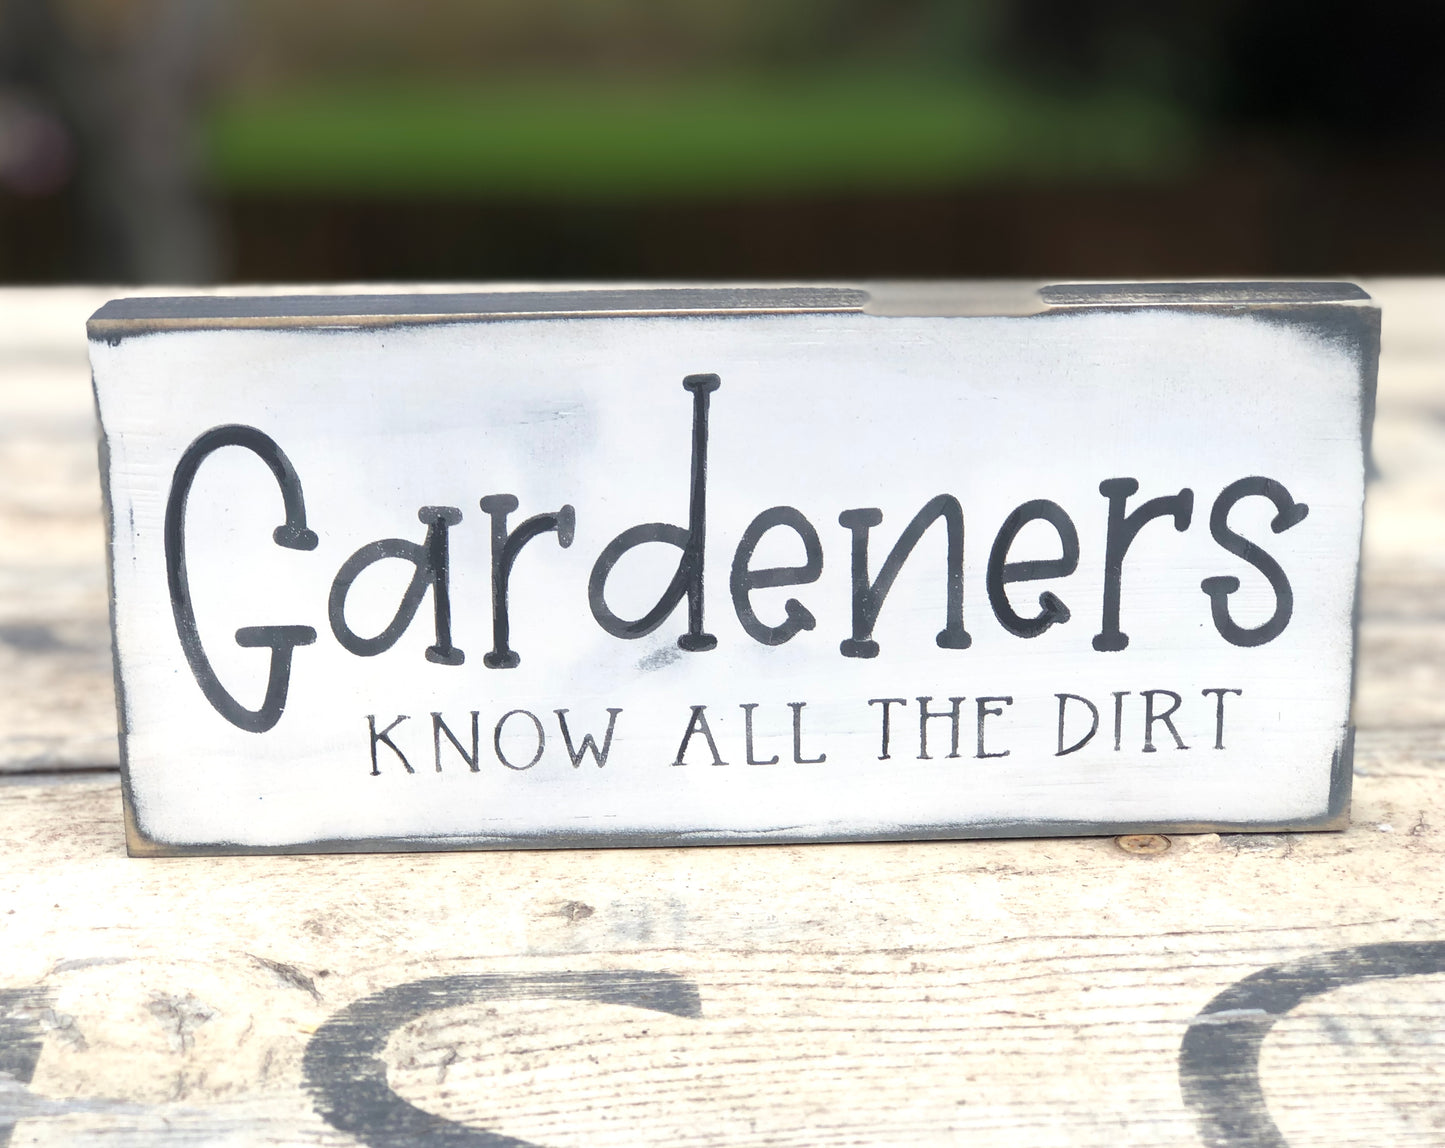 GARDENERS KNOW ALL THE DIRT -WOOD SIGN